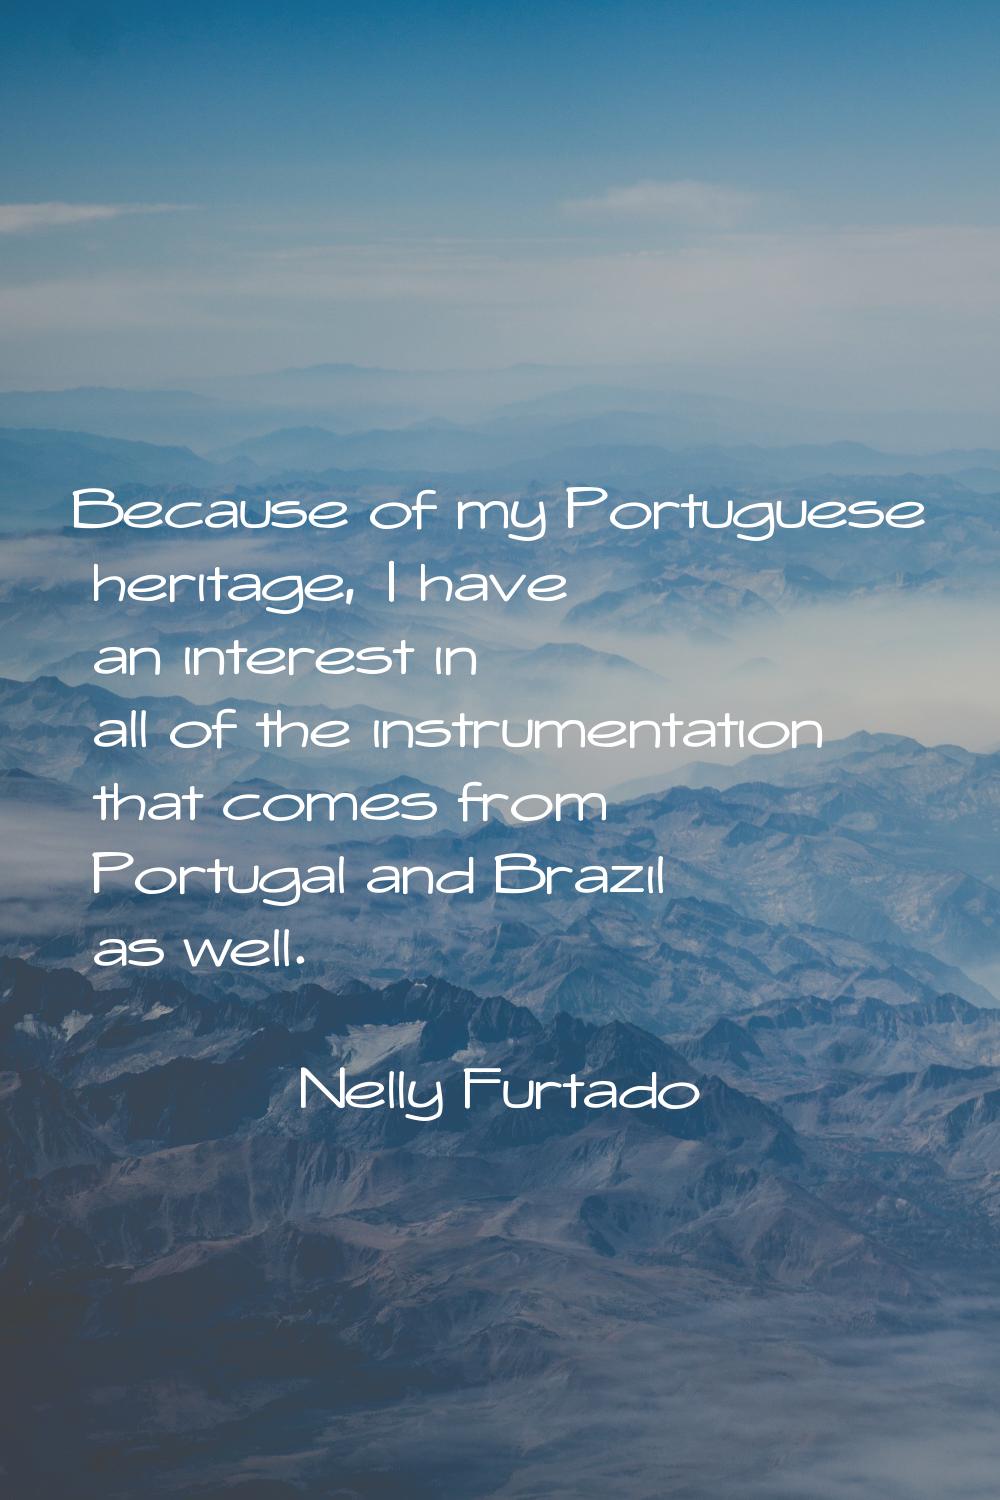 Because of my Portuguese heritage, I have an interest in all of the instrumentation that comes from